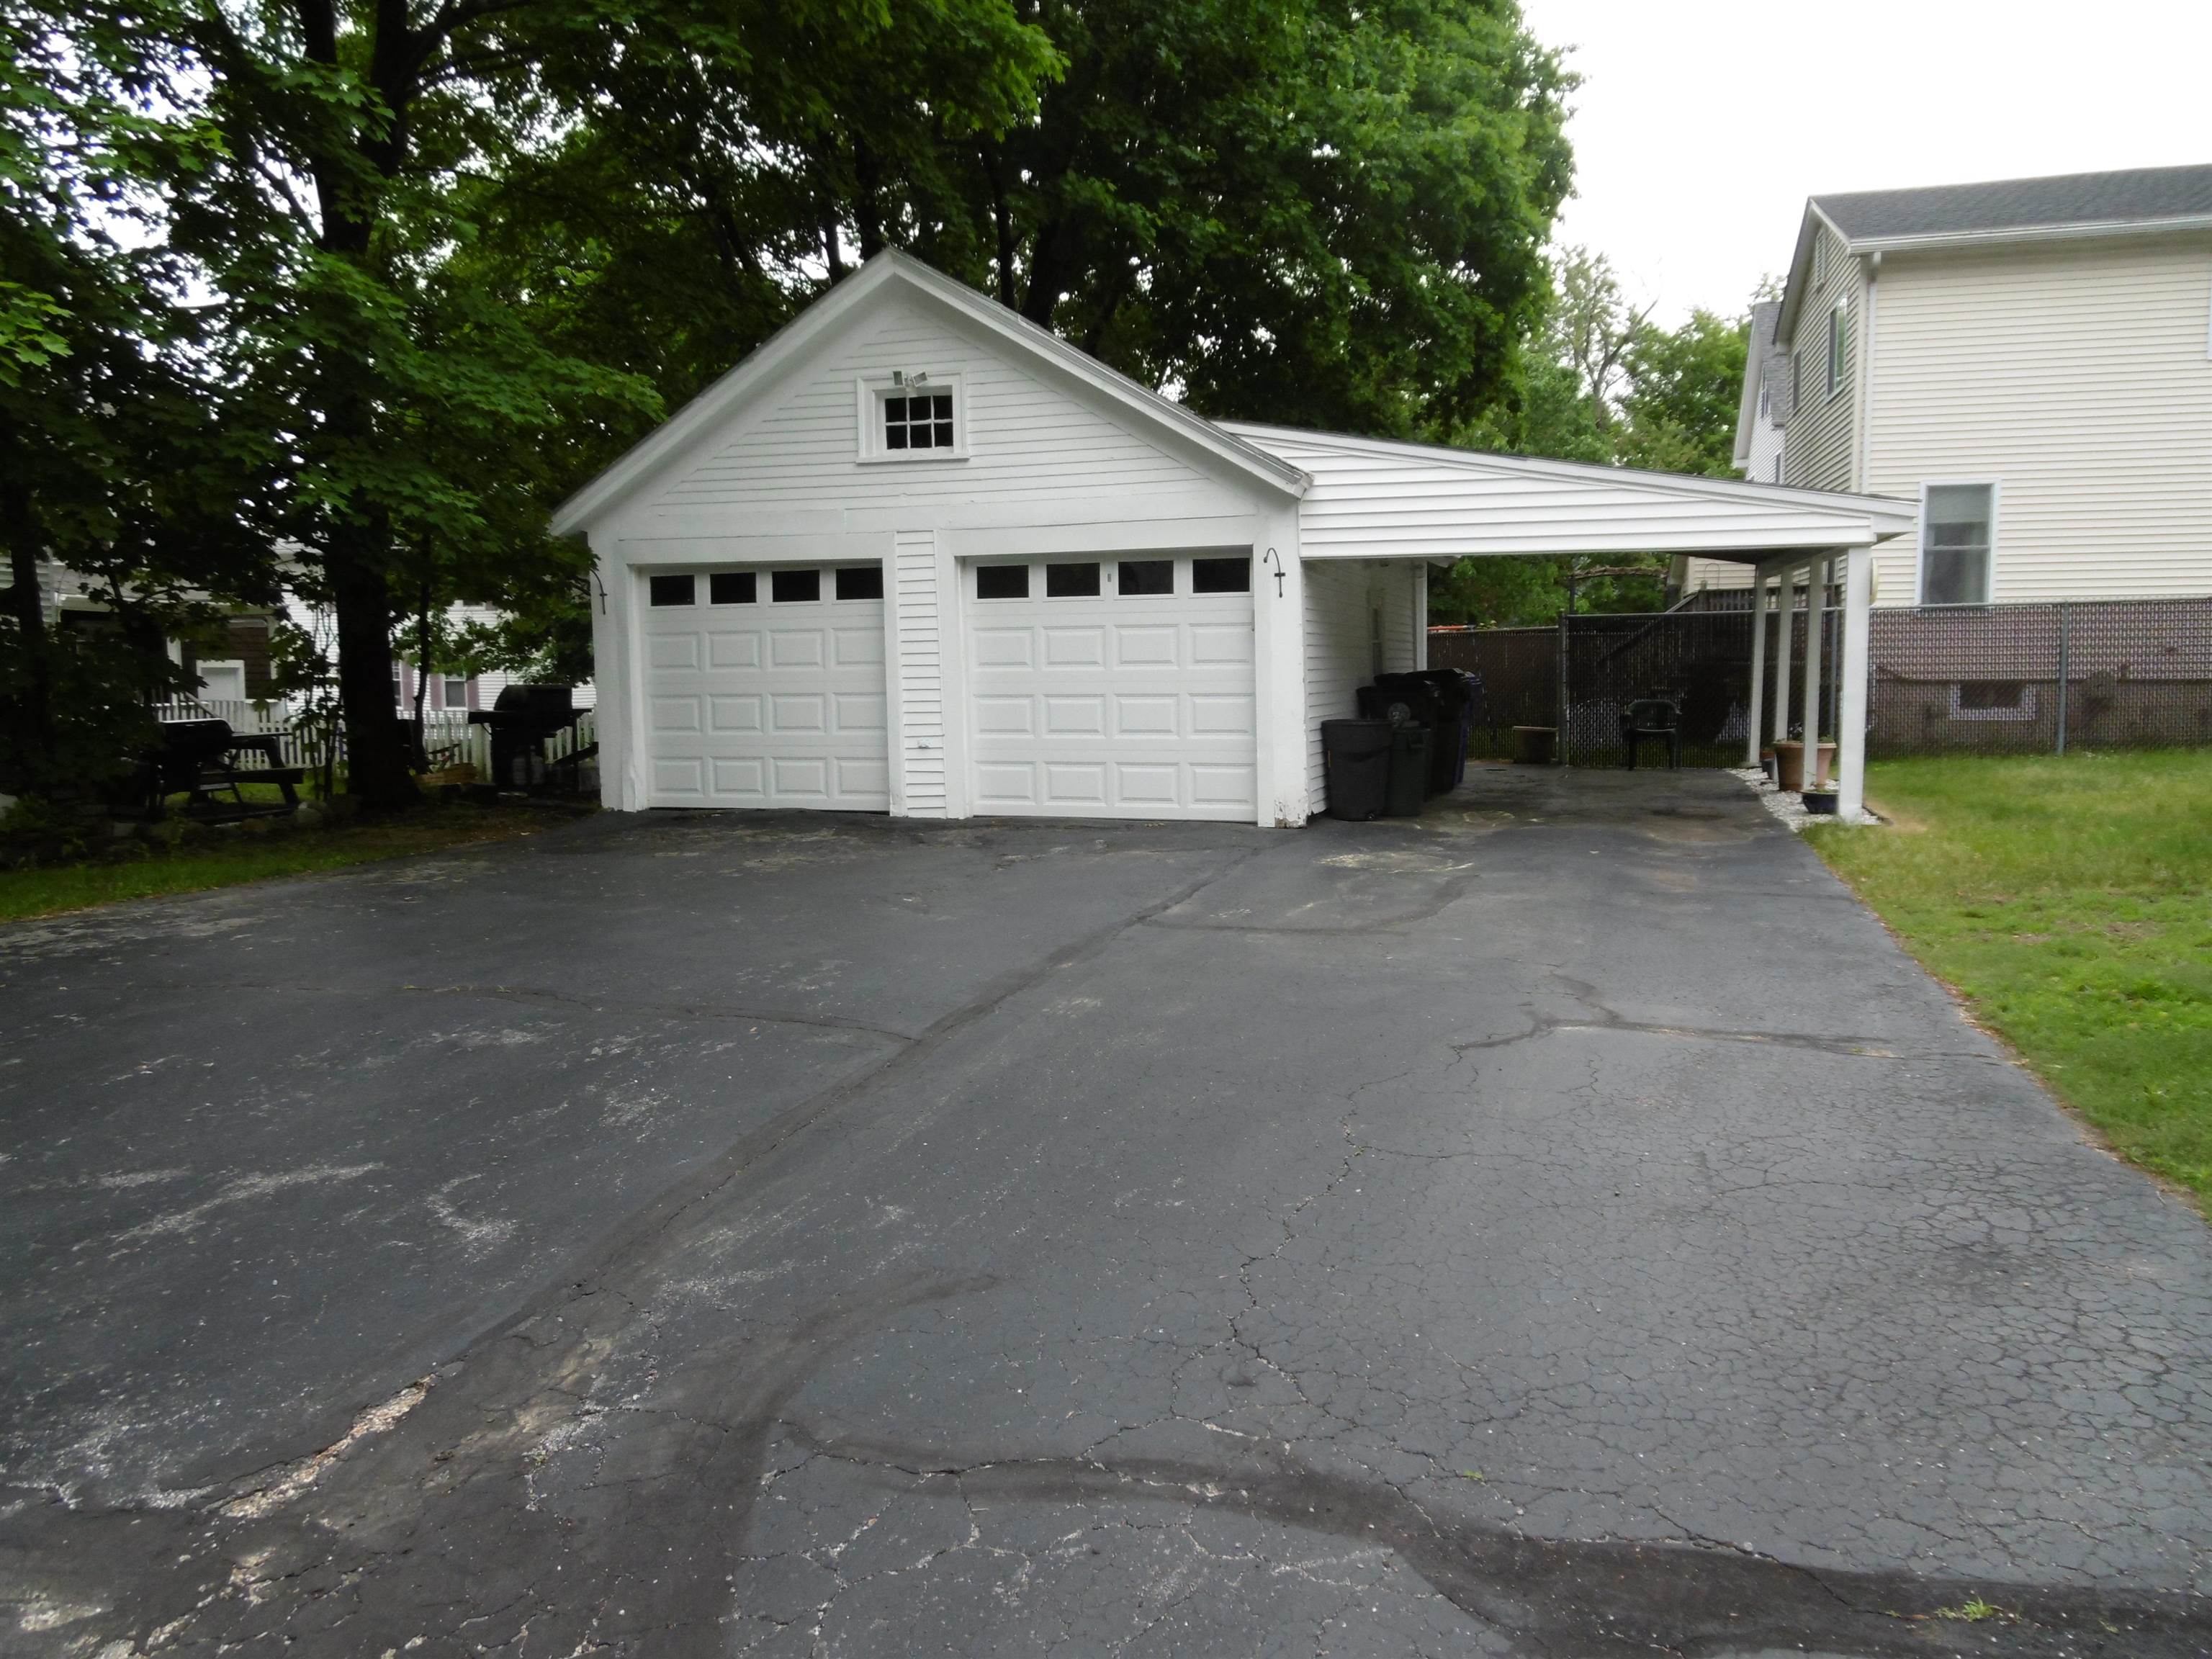 TWO CAR GARAGE + CARPORT. LOTS OF PARKING FOR EVERYONE